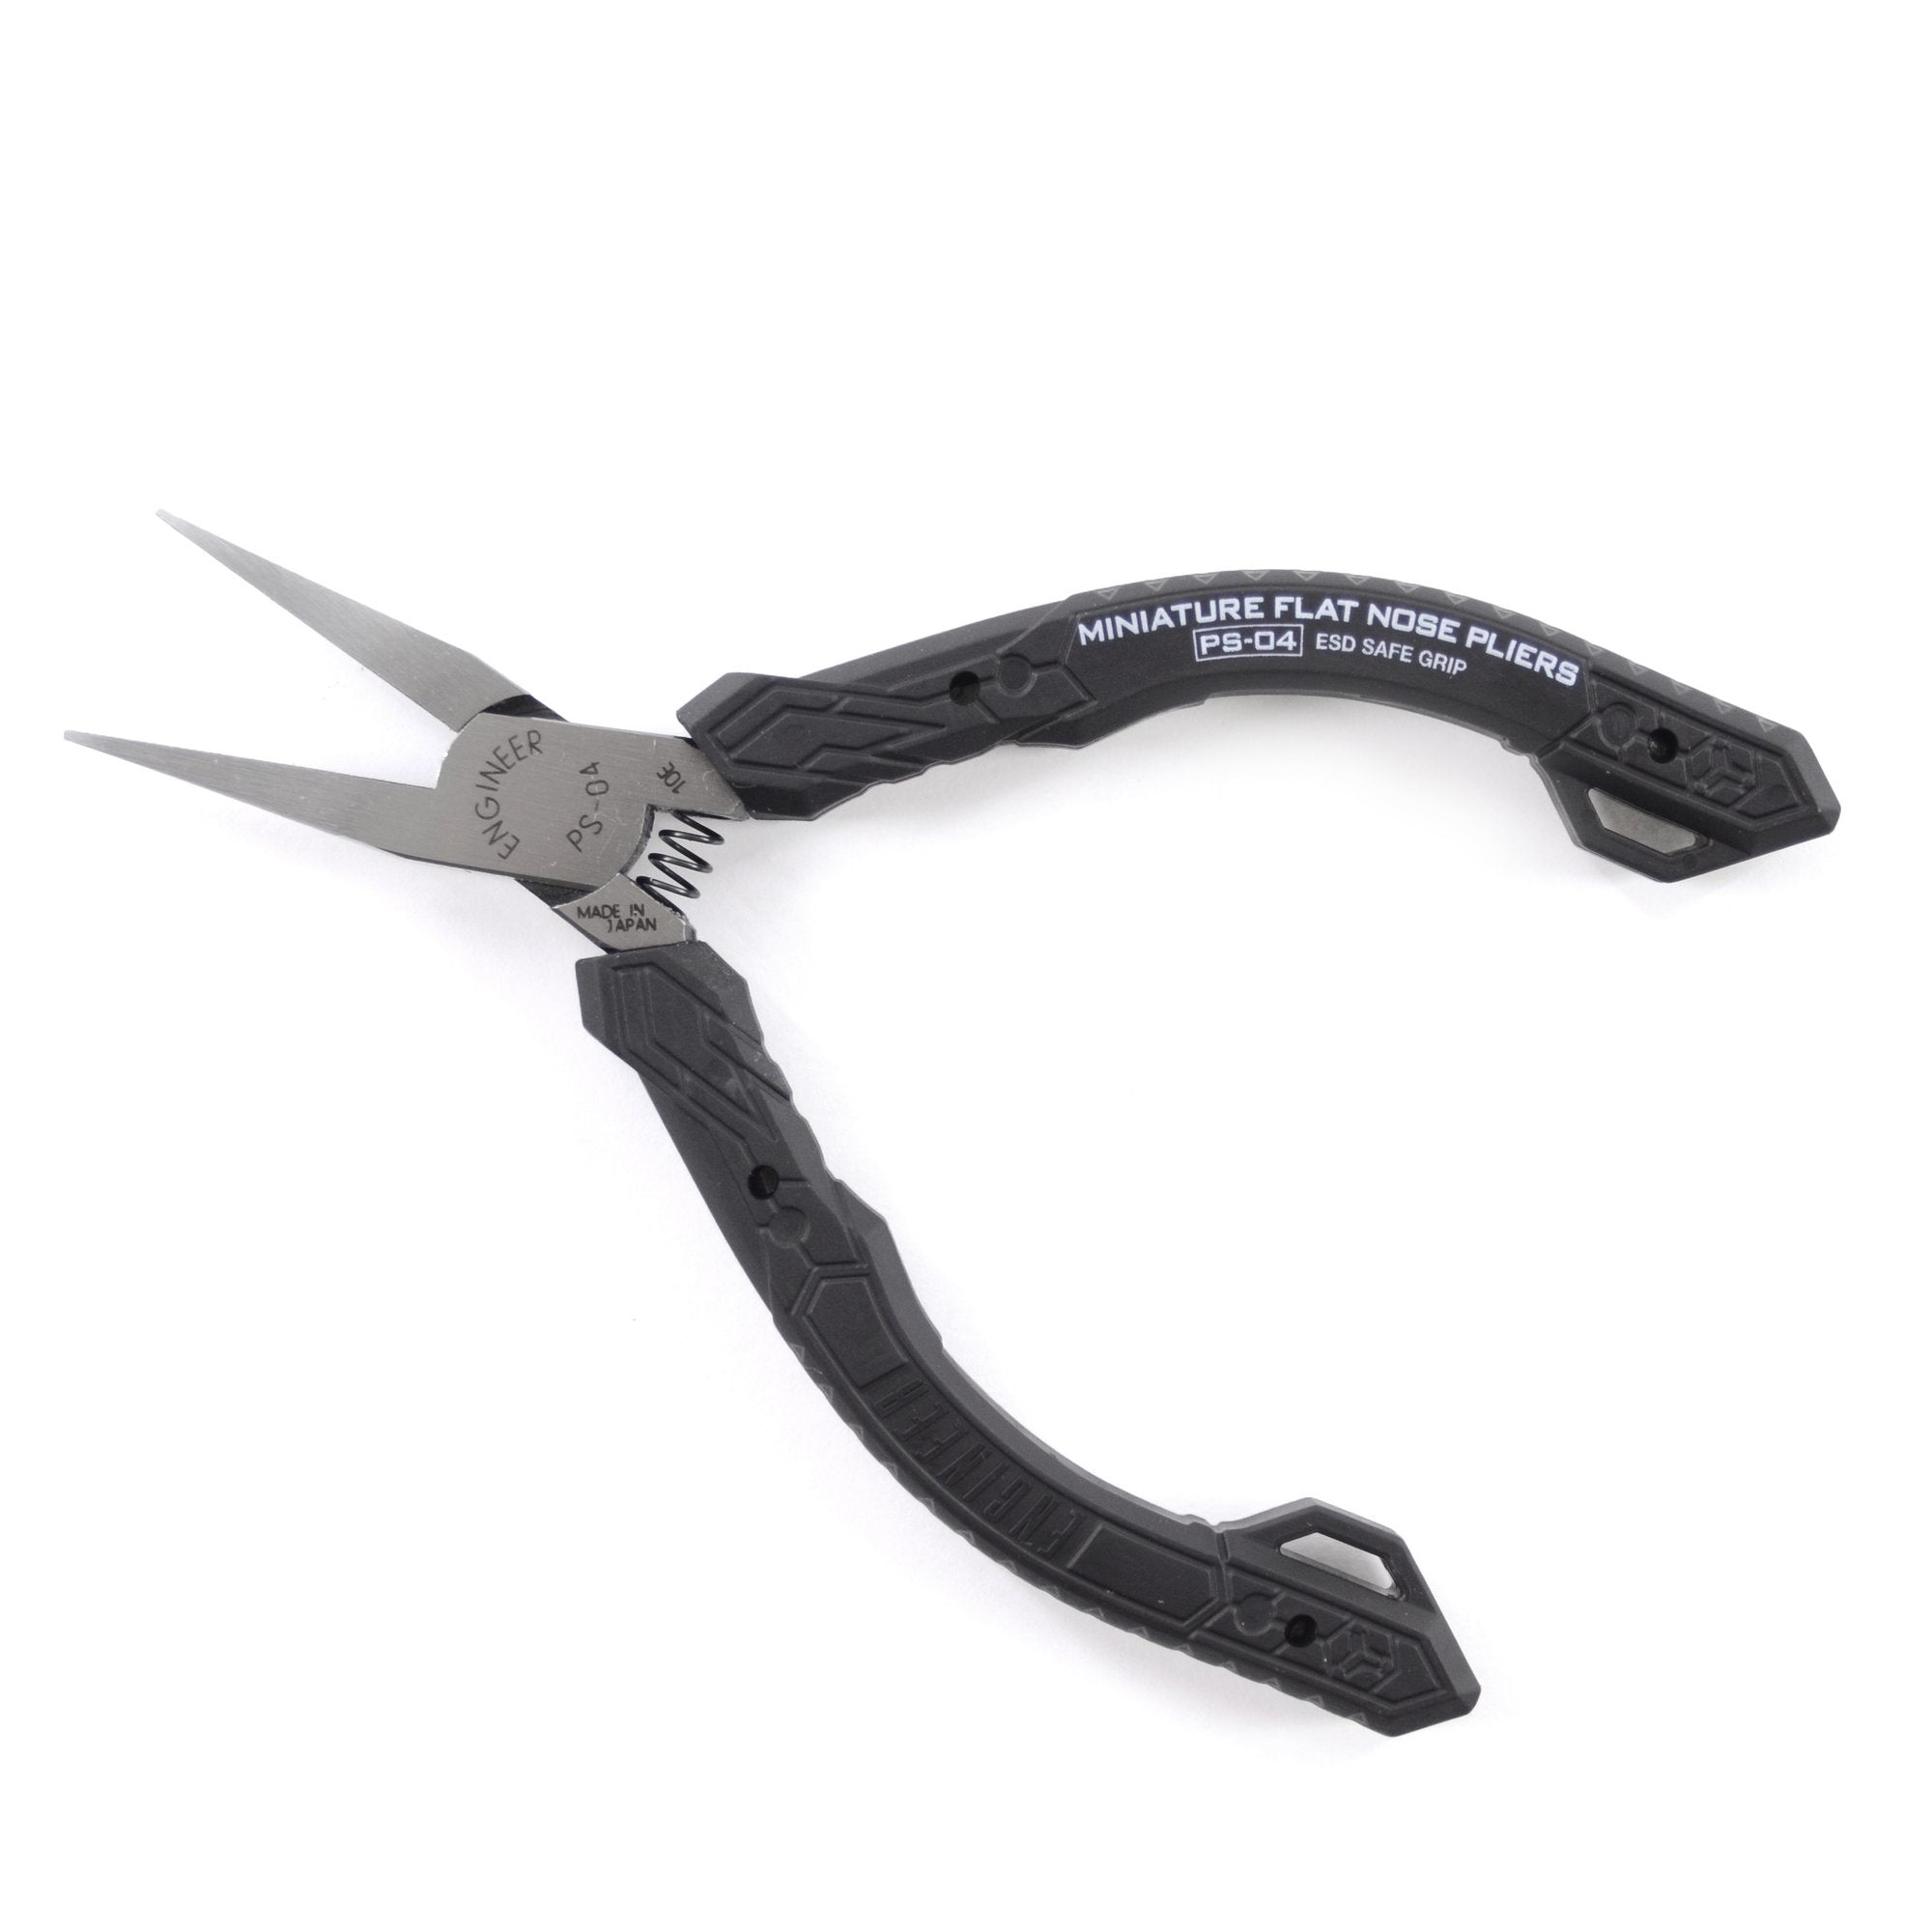 Mini Needle Nose Pliers 4.5 Toothless Precision Plier, Plastic Handle -  Black Red - Bed Bath & Beyond - 37847616